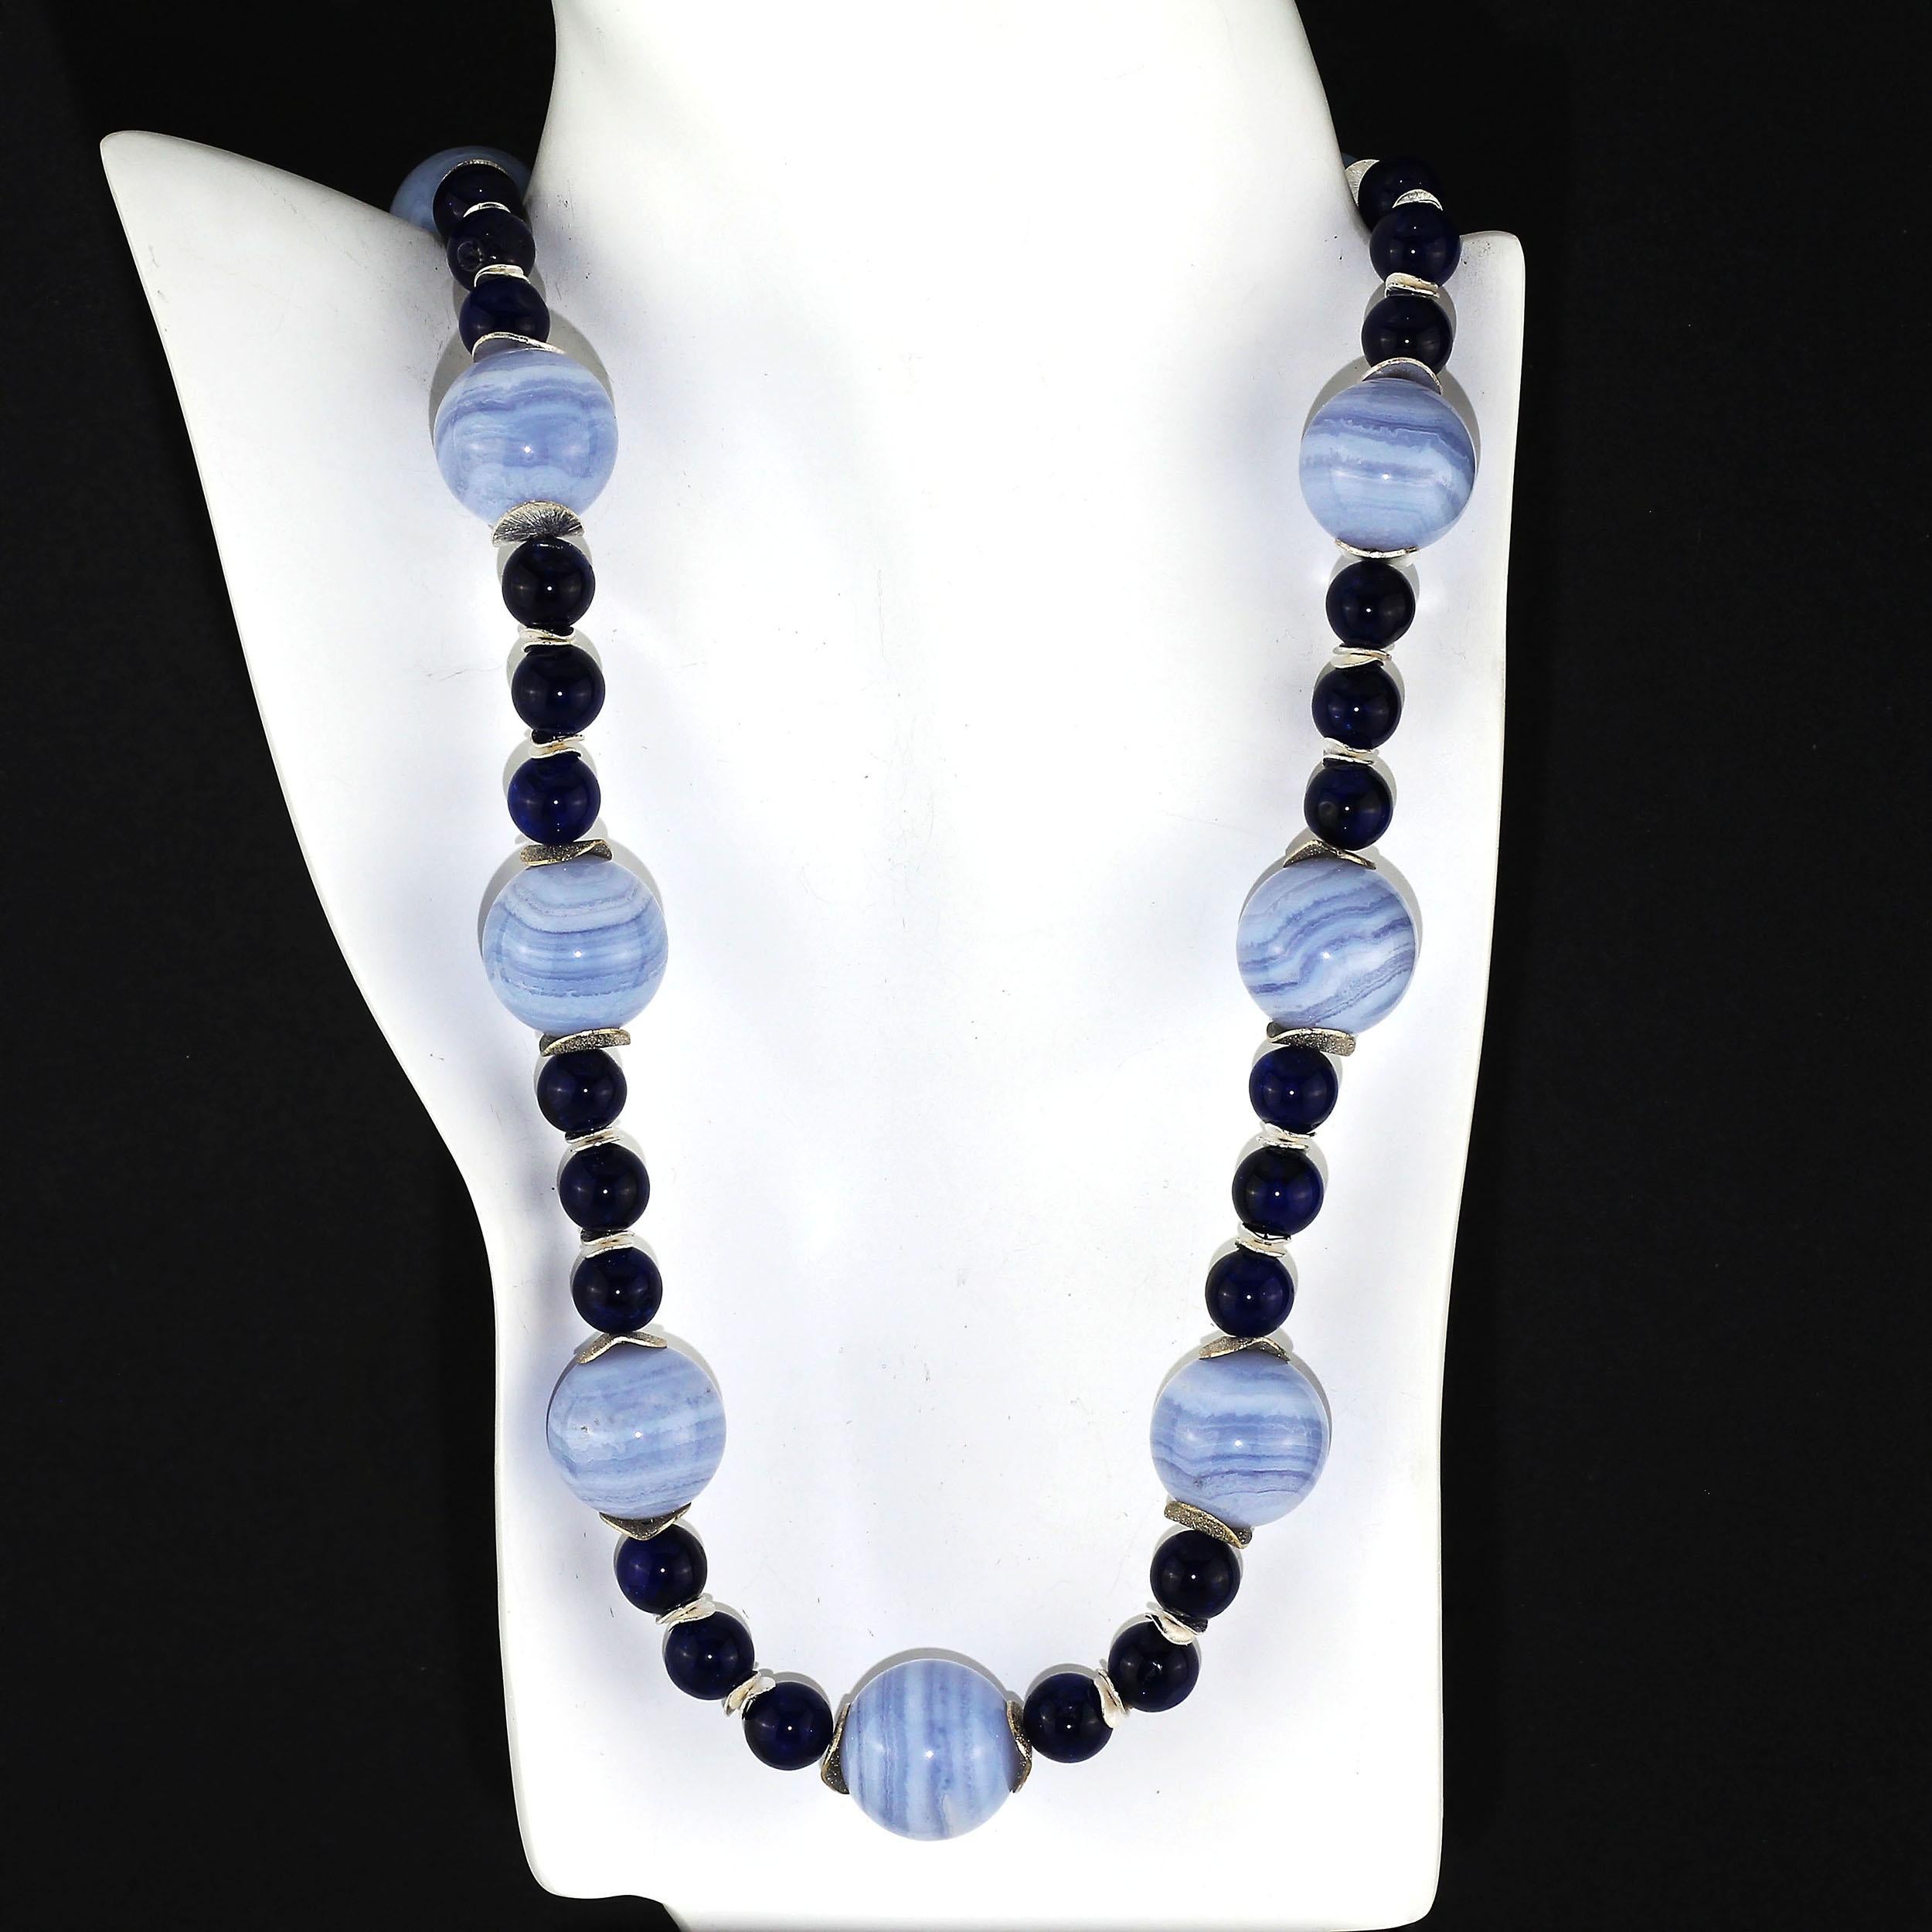 Artisan Gemjunky Hot Topic Necklace of Blue Lace Agate and Blue Agate